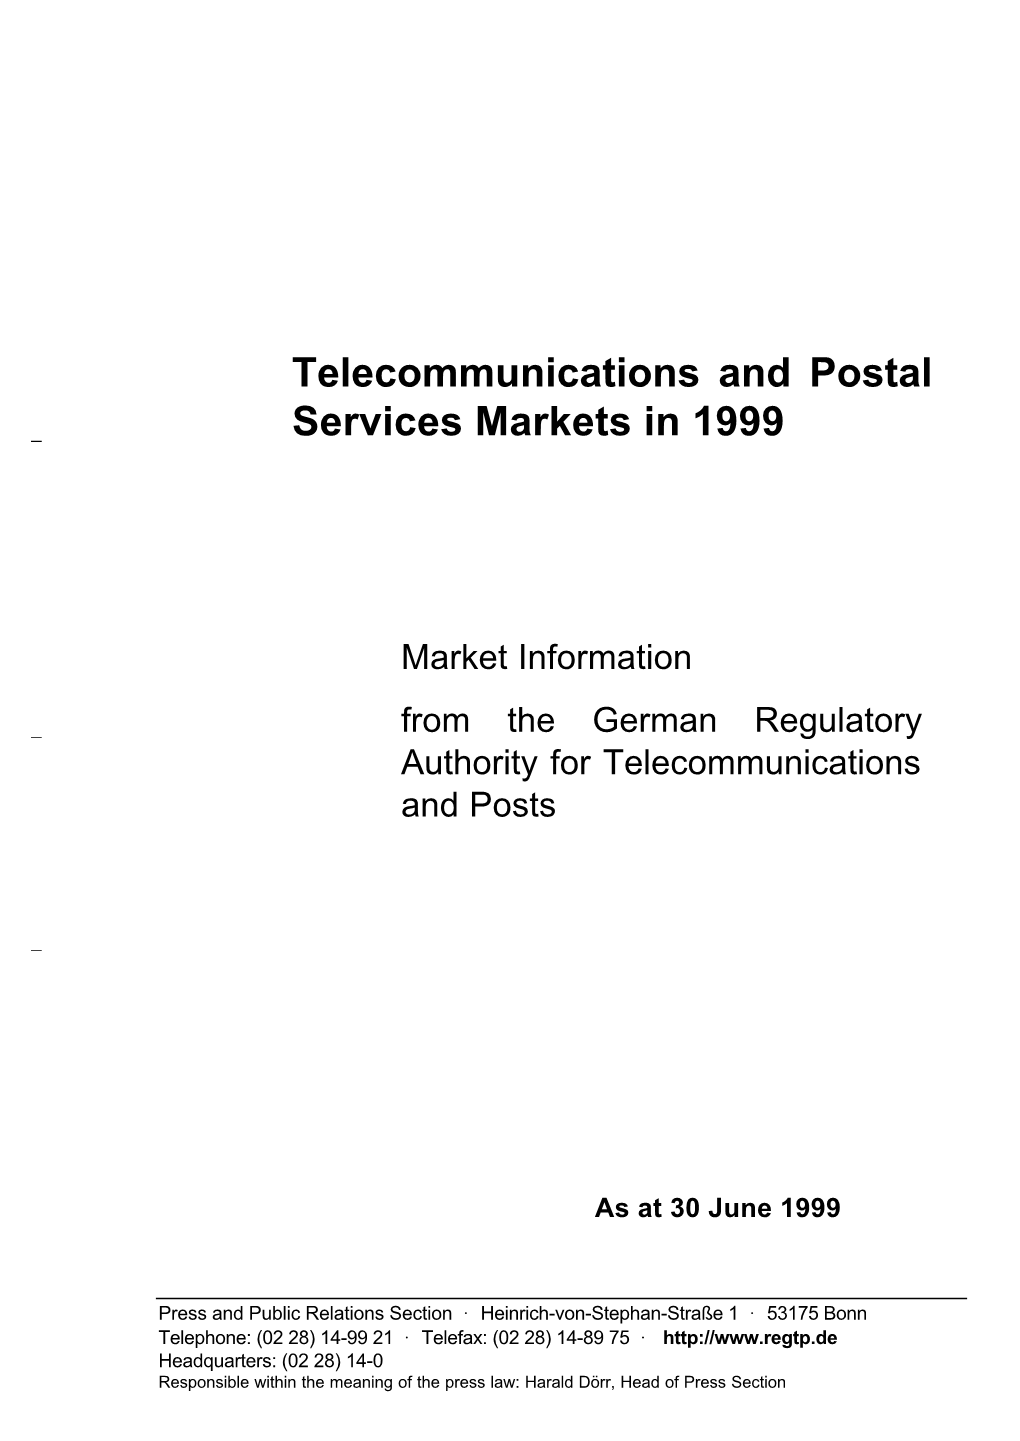 Telecommunications and Postal Services Markets in 1999